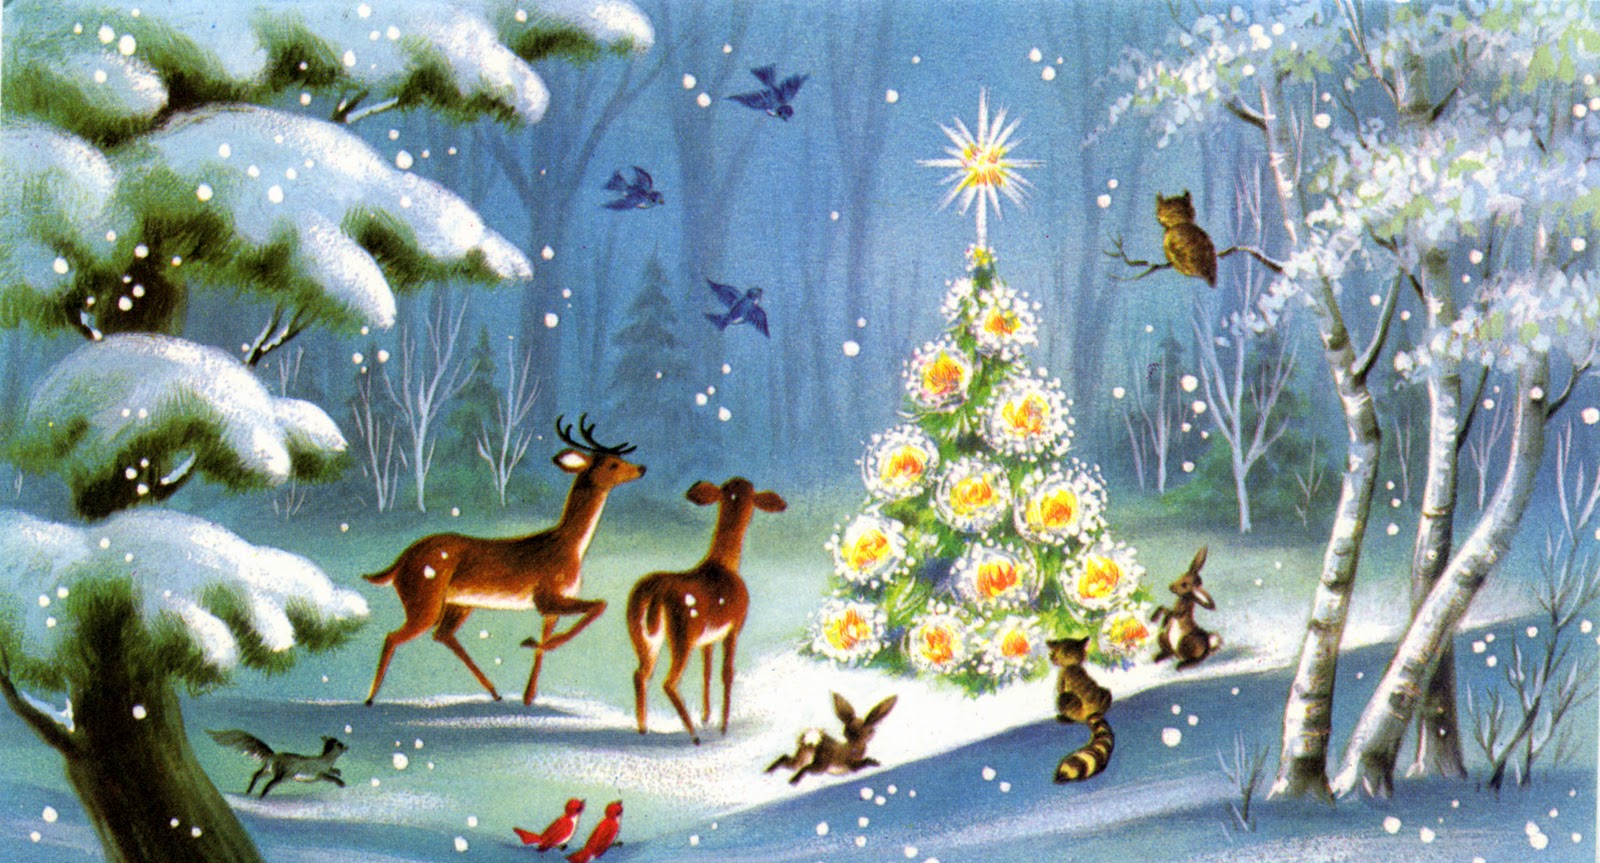 Free Vintage Christmas Images To Download